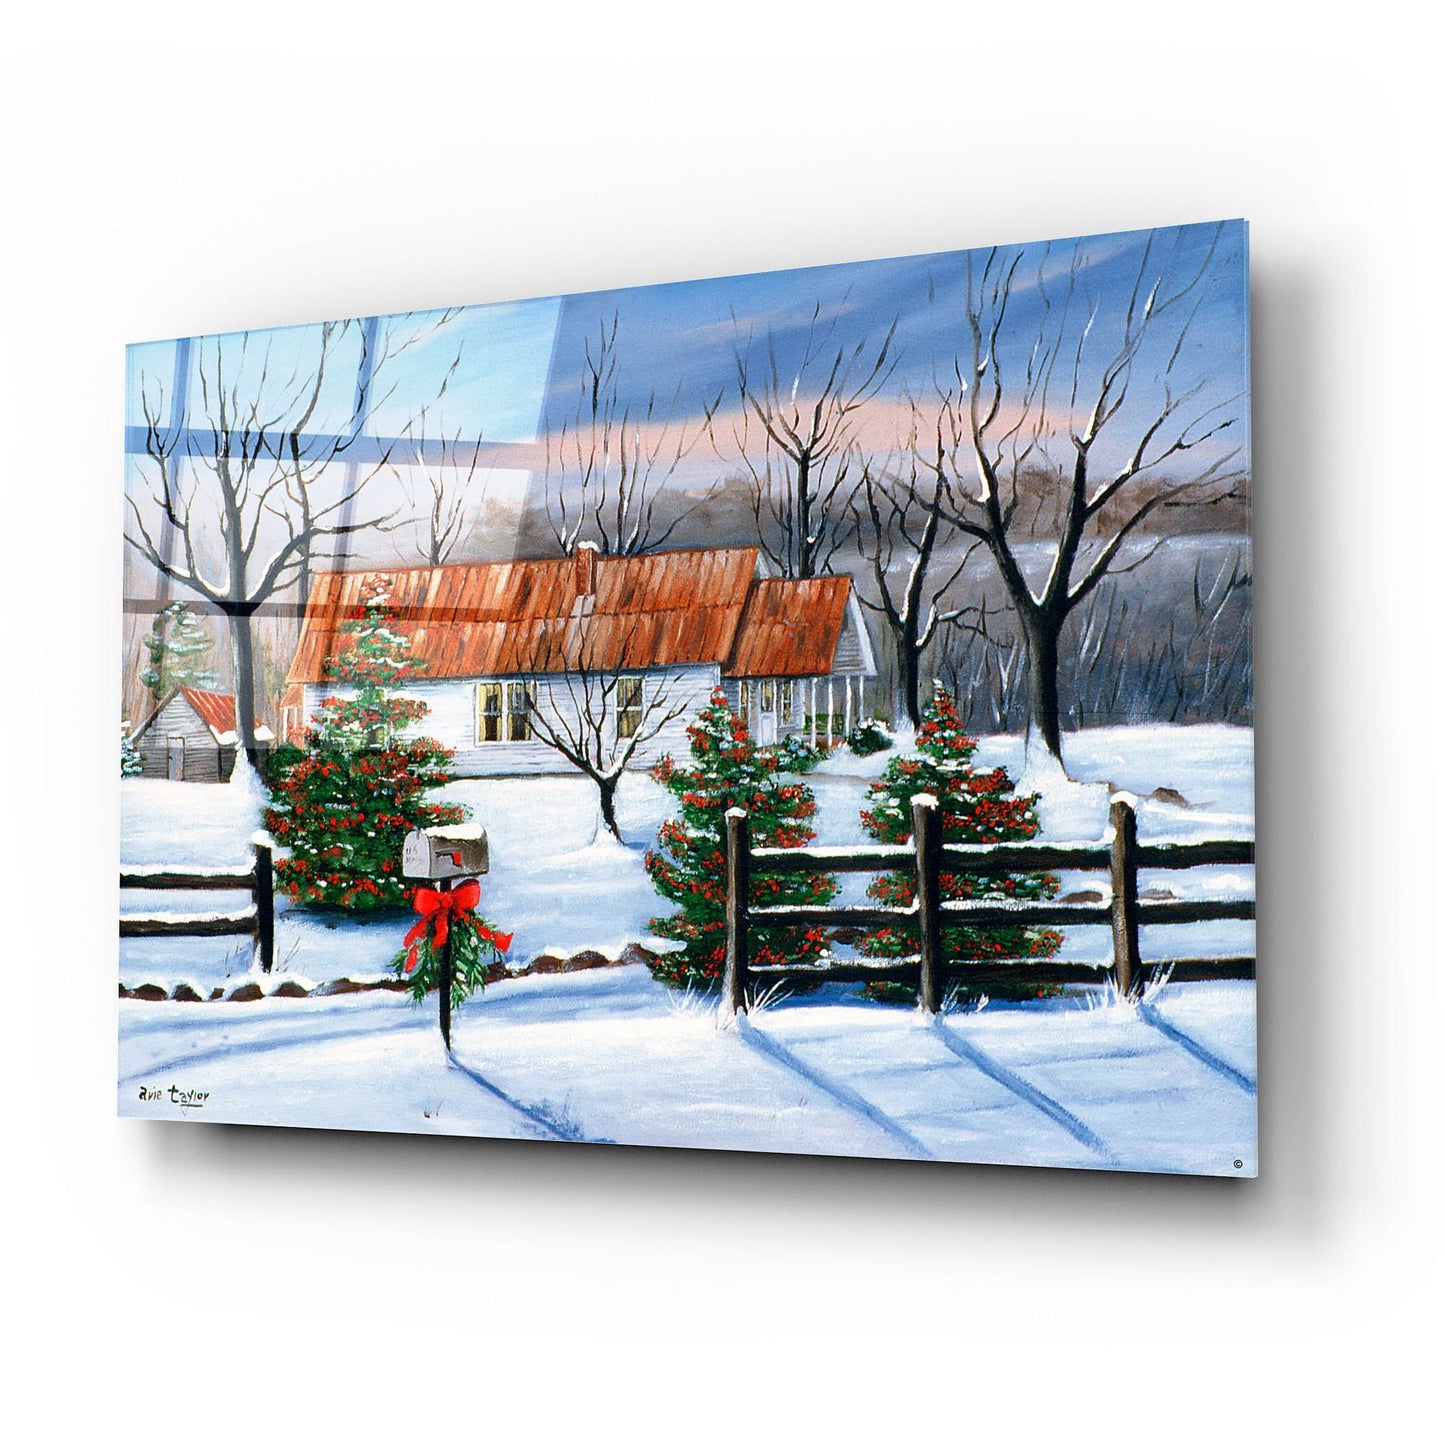 Epic Art 'Mom and Dad's at Christmas' by Arie Reinhardt Taylor, Acrylic Glass Wall Art,24x16